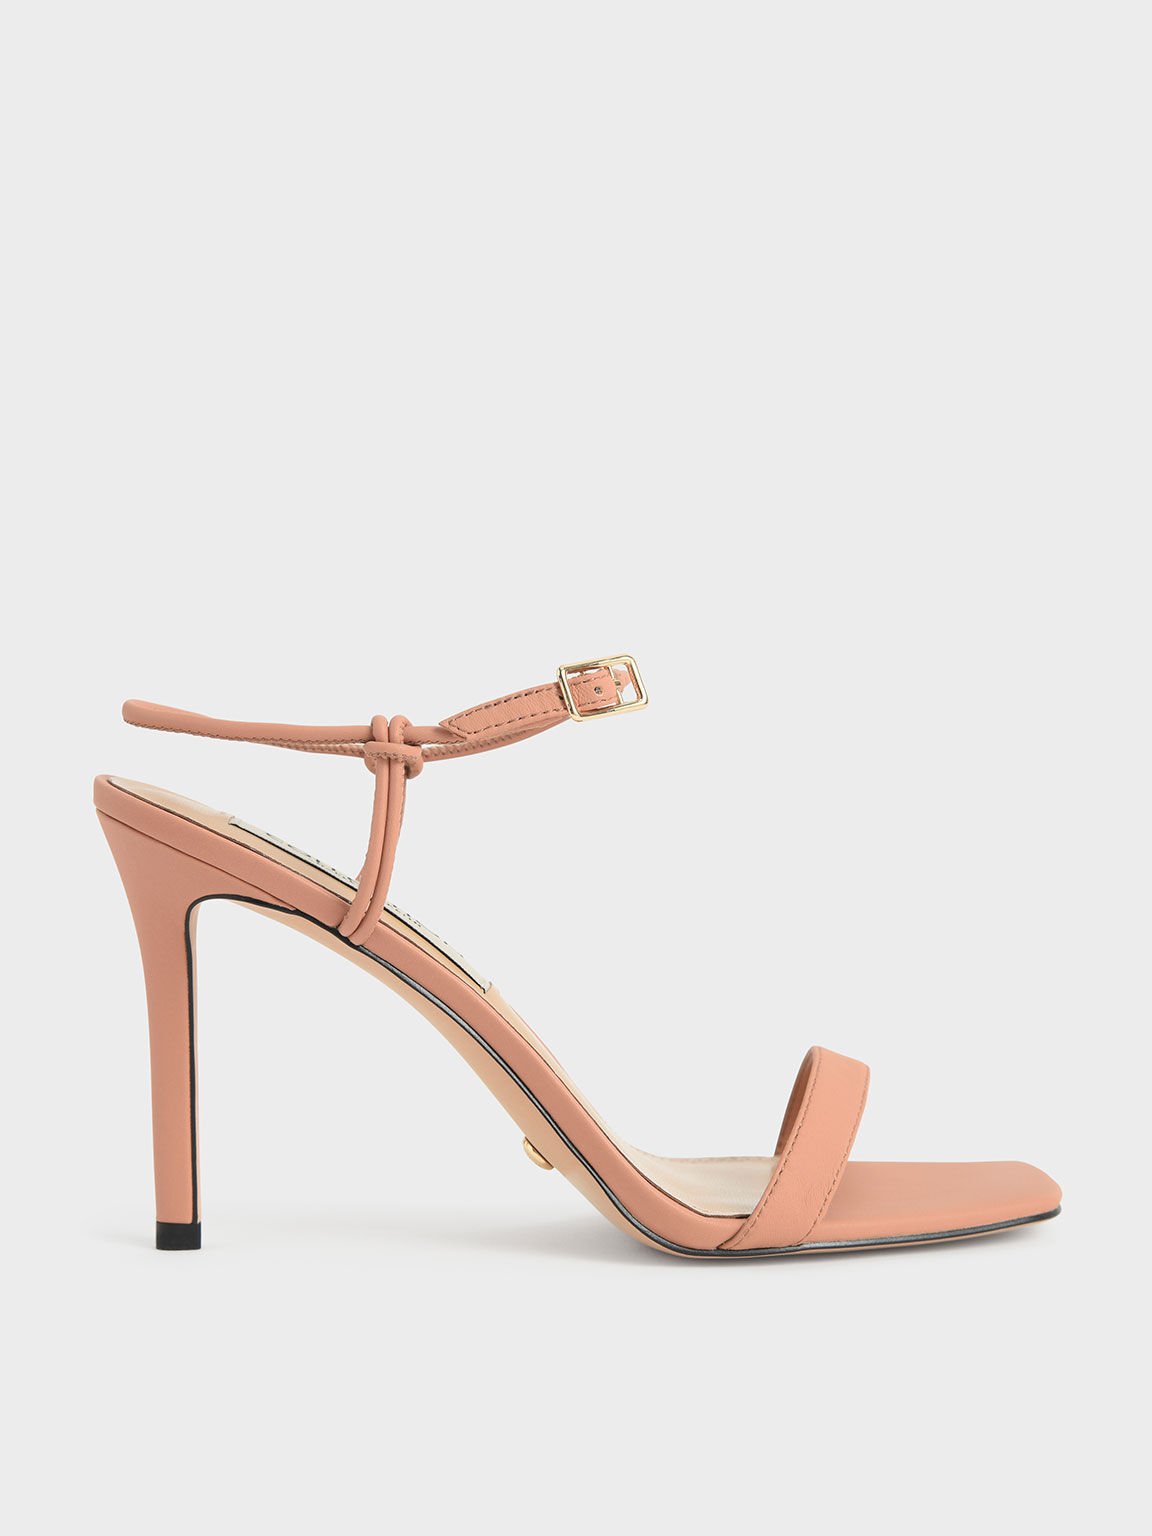 US 6-10 Blush Strappy Caged Knotted Open Toe Bootie Heel Sandals 